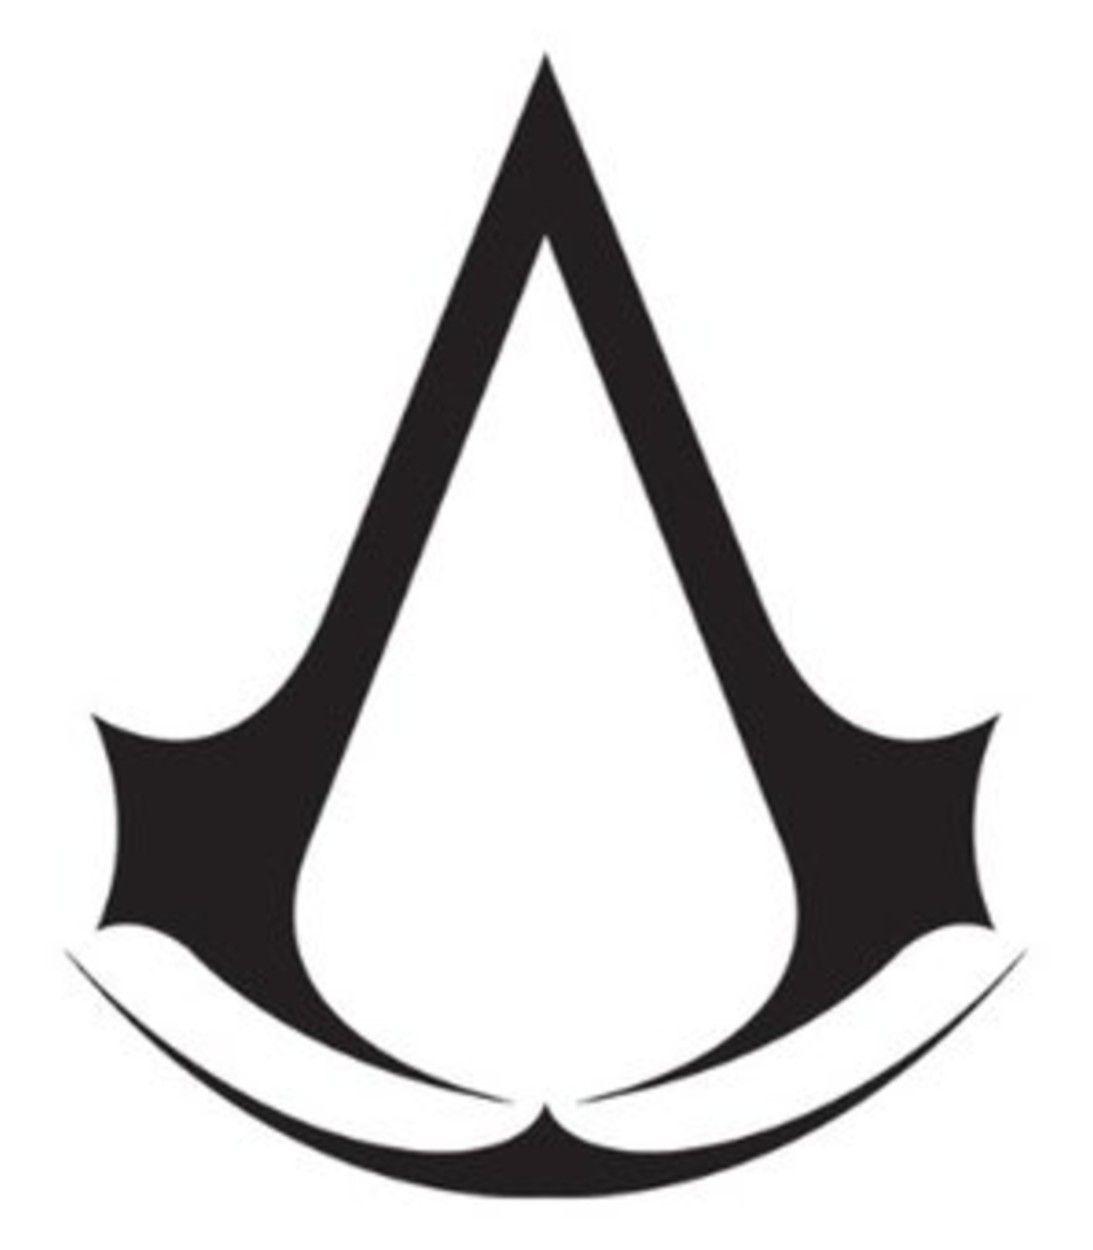 Ubisoft Responds To Assassin's Creed Infinity Report